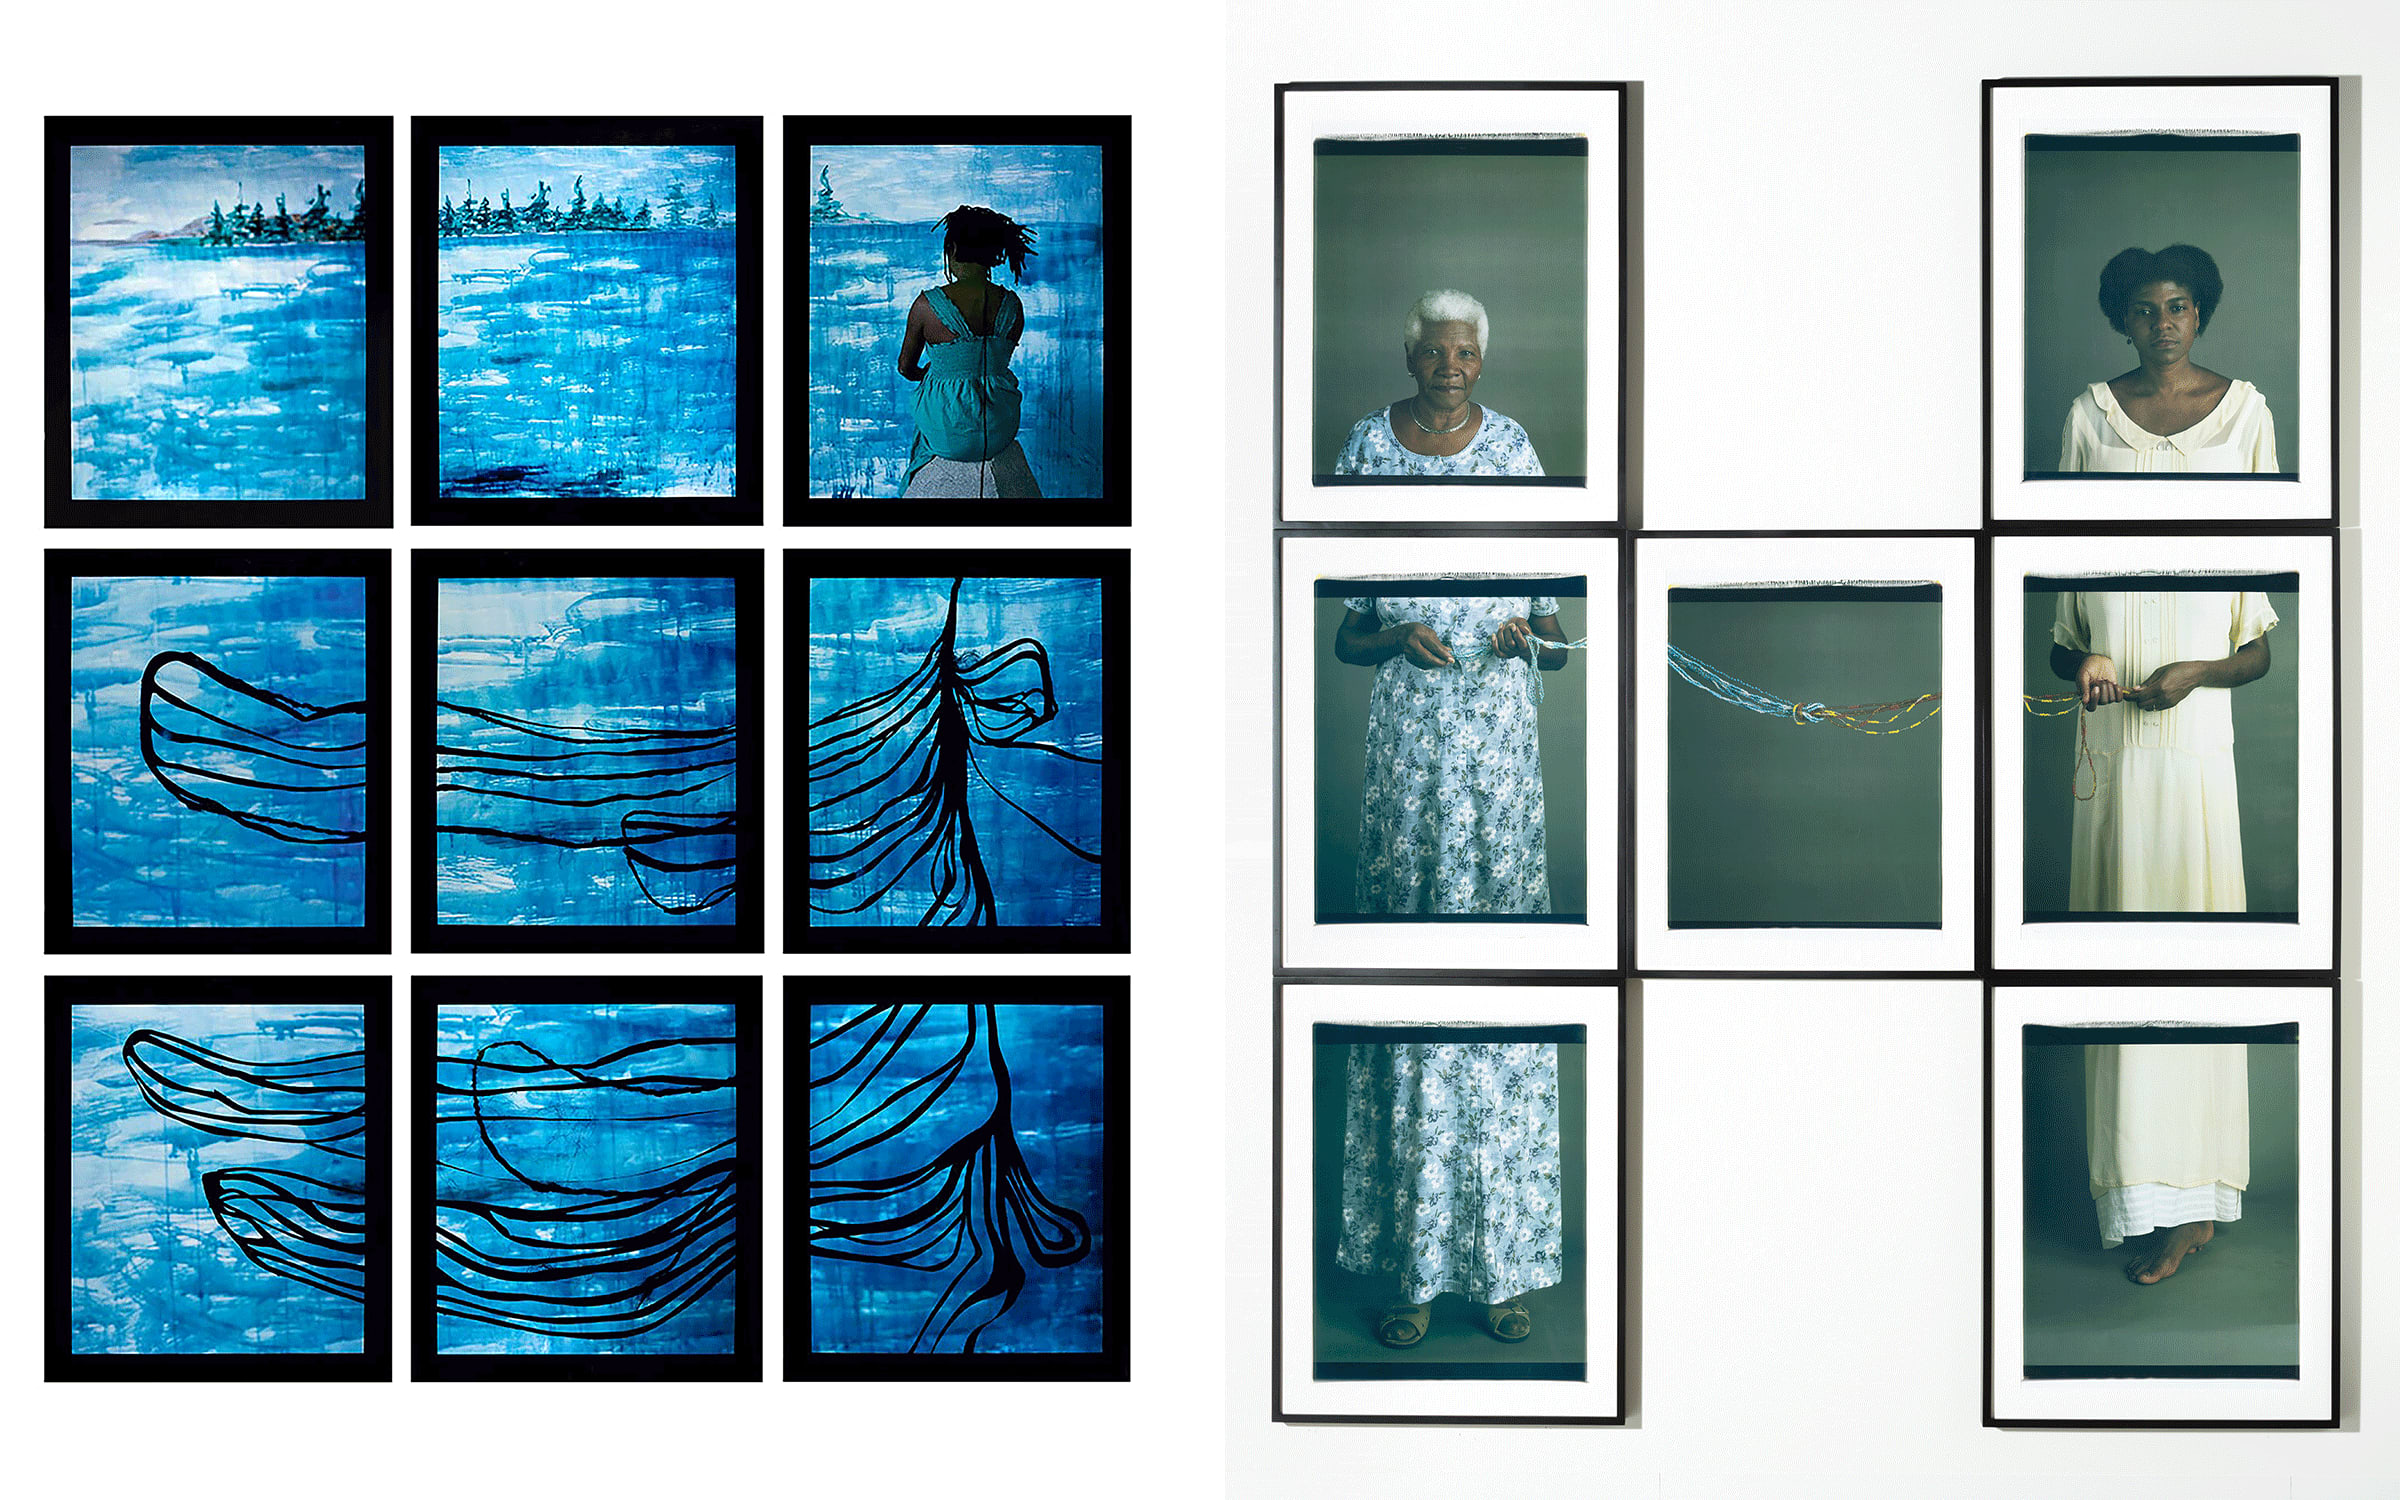 Both artworks by María Magdalena Campos-Pons, courtesy of the artist, Galerie Barbara Thumm, and Gallery Wendi Norris. Left: Dreaming of an Island, 2008. Right: Replenishing, 2001.